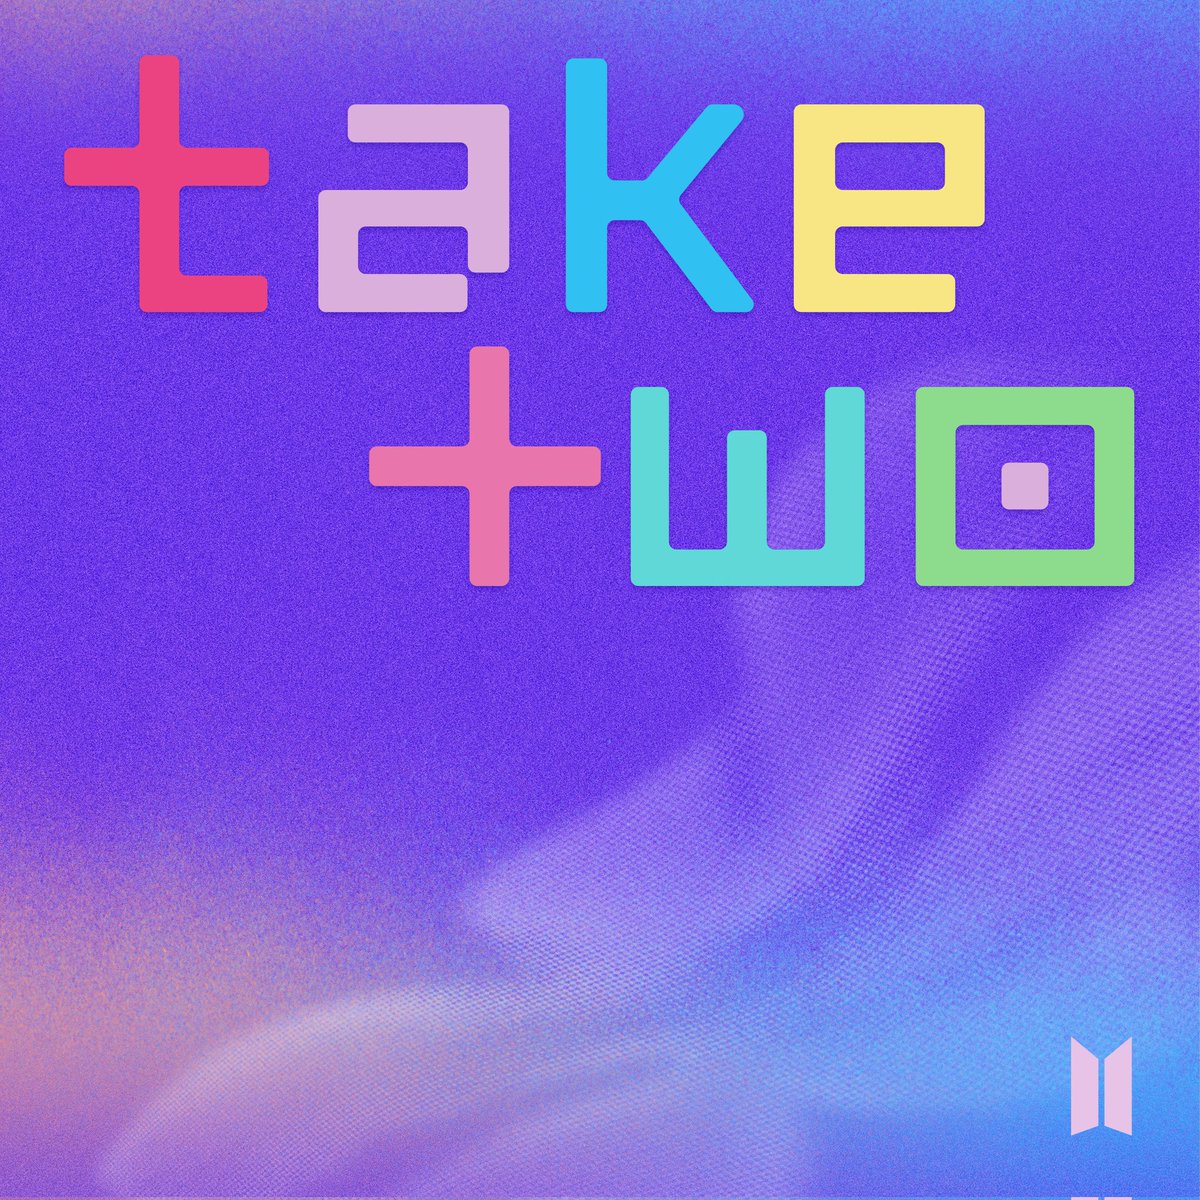 'Take Two', new song for ARMY!!!!! BTS truly goes up and beyond for us 💜 Can't wait! 🎶

#2022BTSFESTA #BTS10thAnniversary